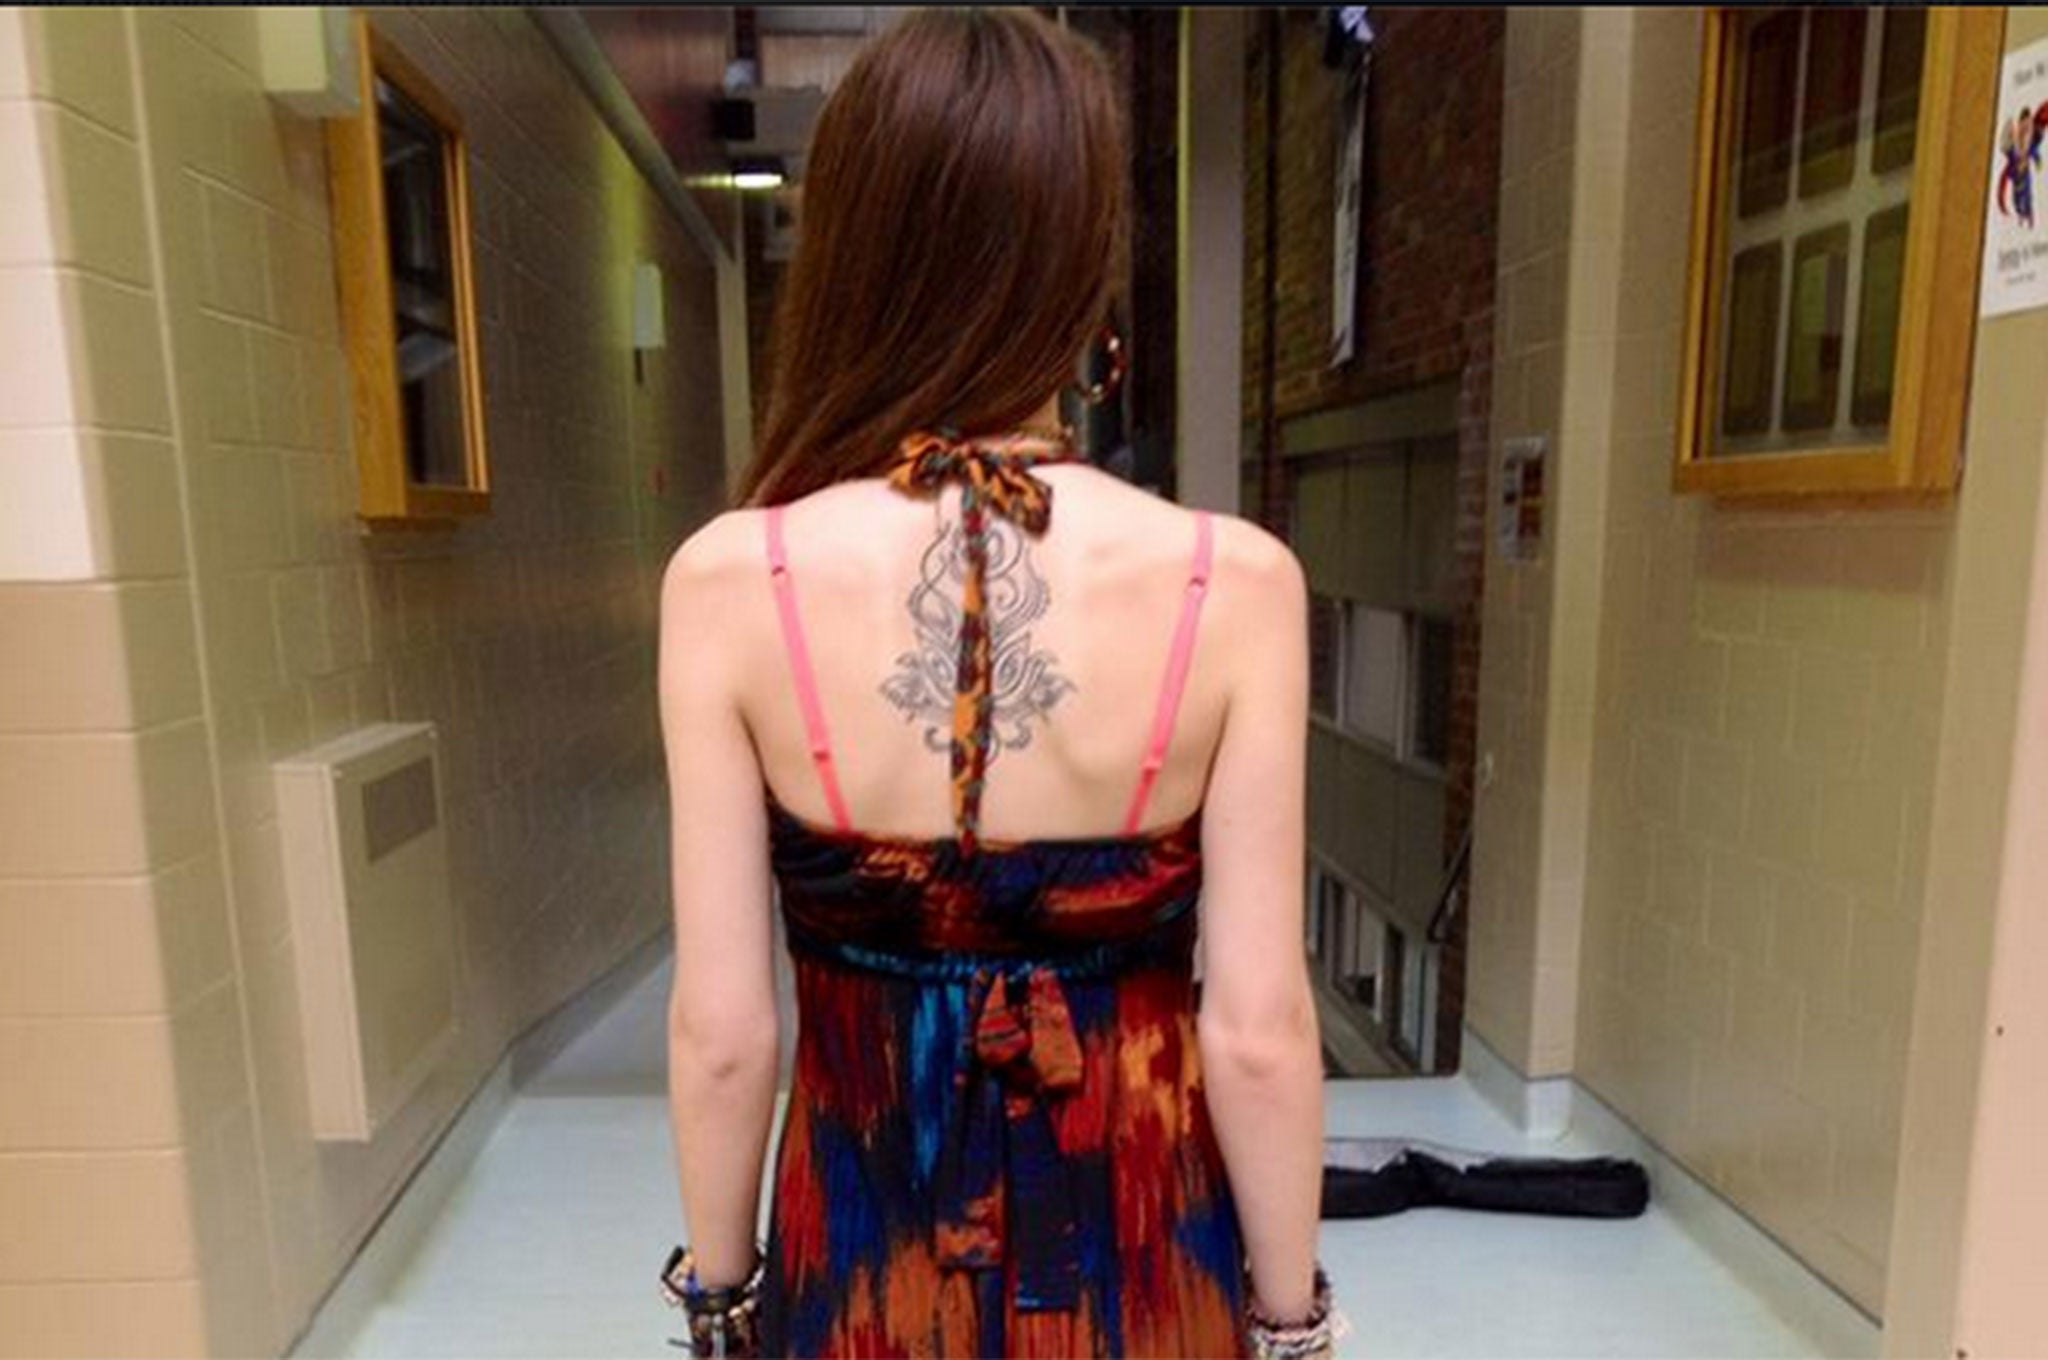 Lauren Wiggen shows the dress she was given detention for after it was deemed 'inappropriate' by her school